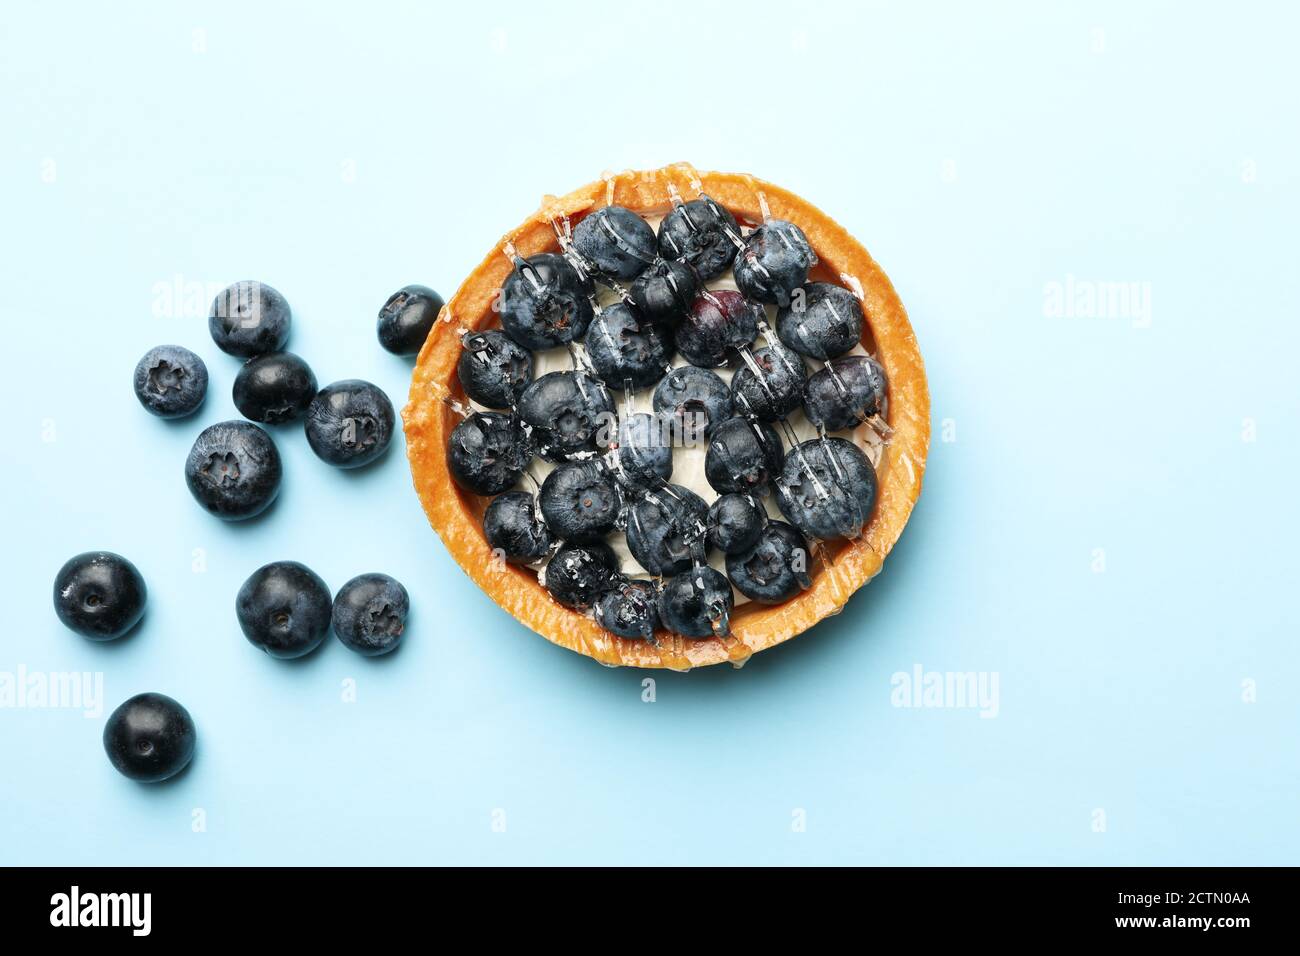 Blueberry pie on blue background, top view Stock Photo